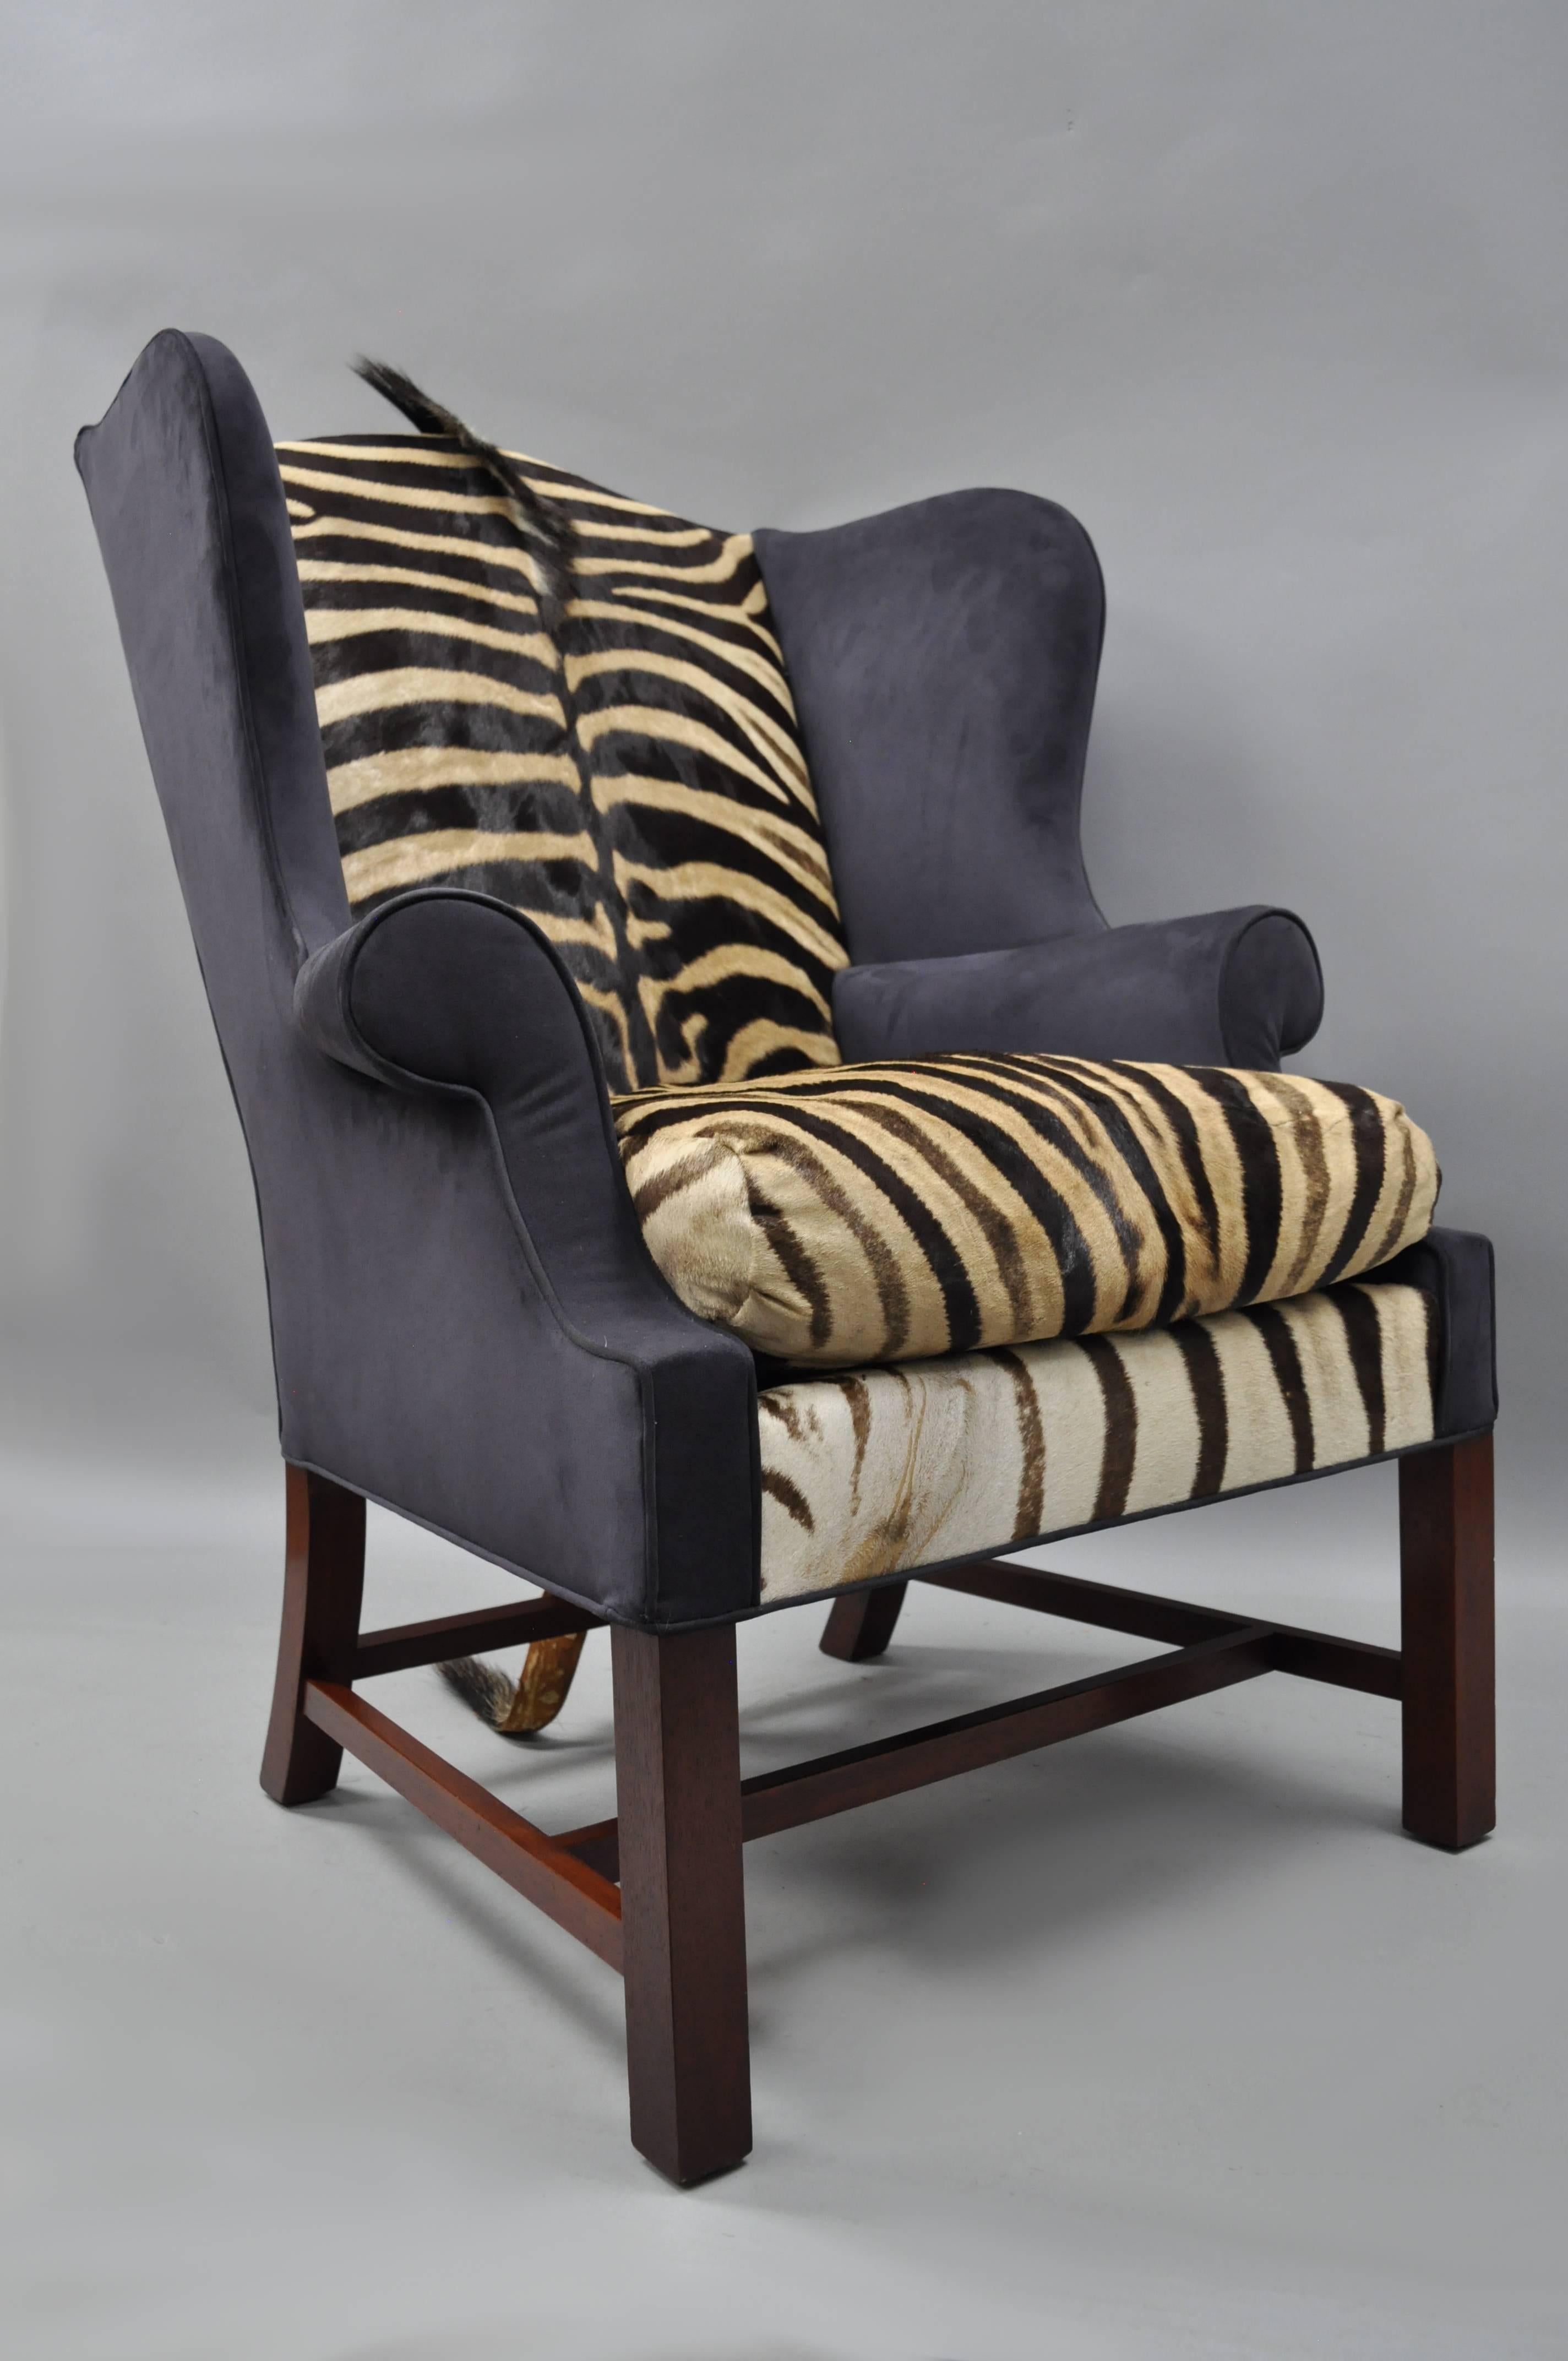 Zebra Hide Blue Suede Mahogany English Georgian Style Wingback Library Chair For Sale 3